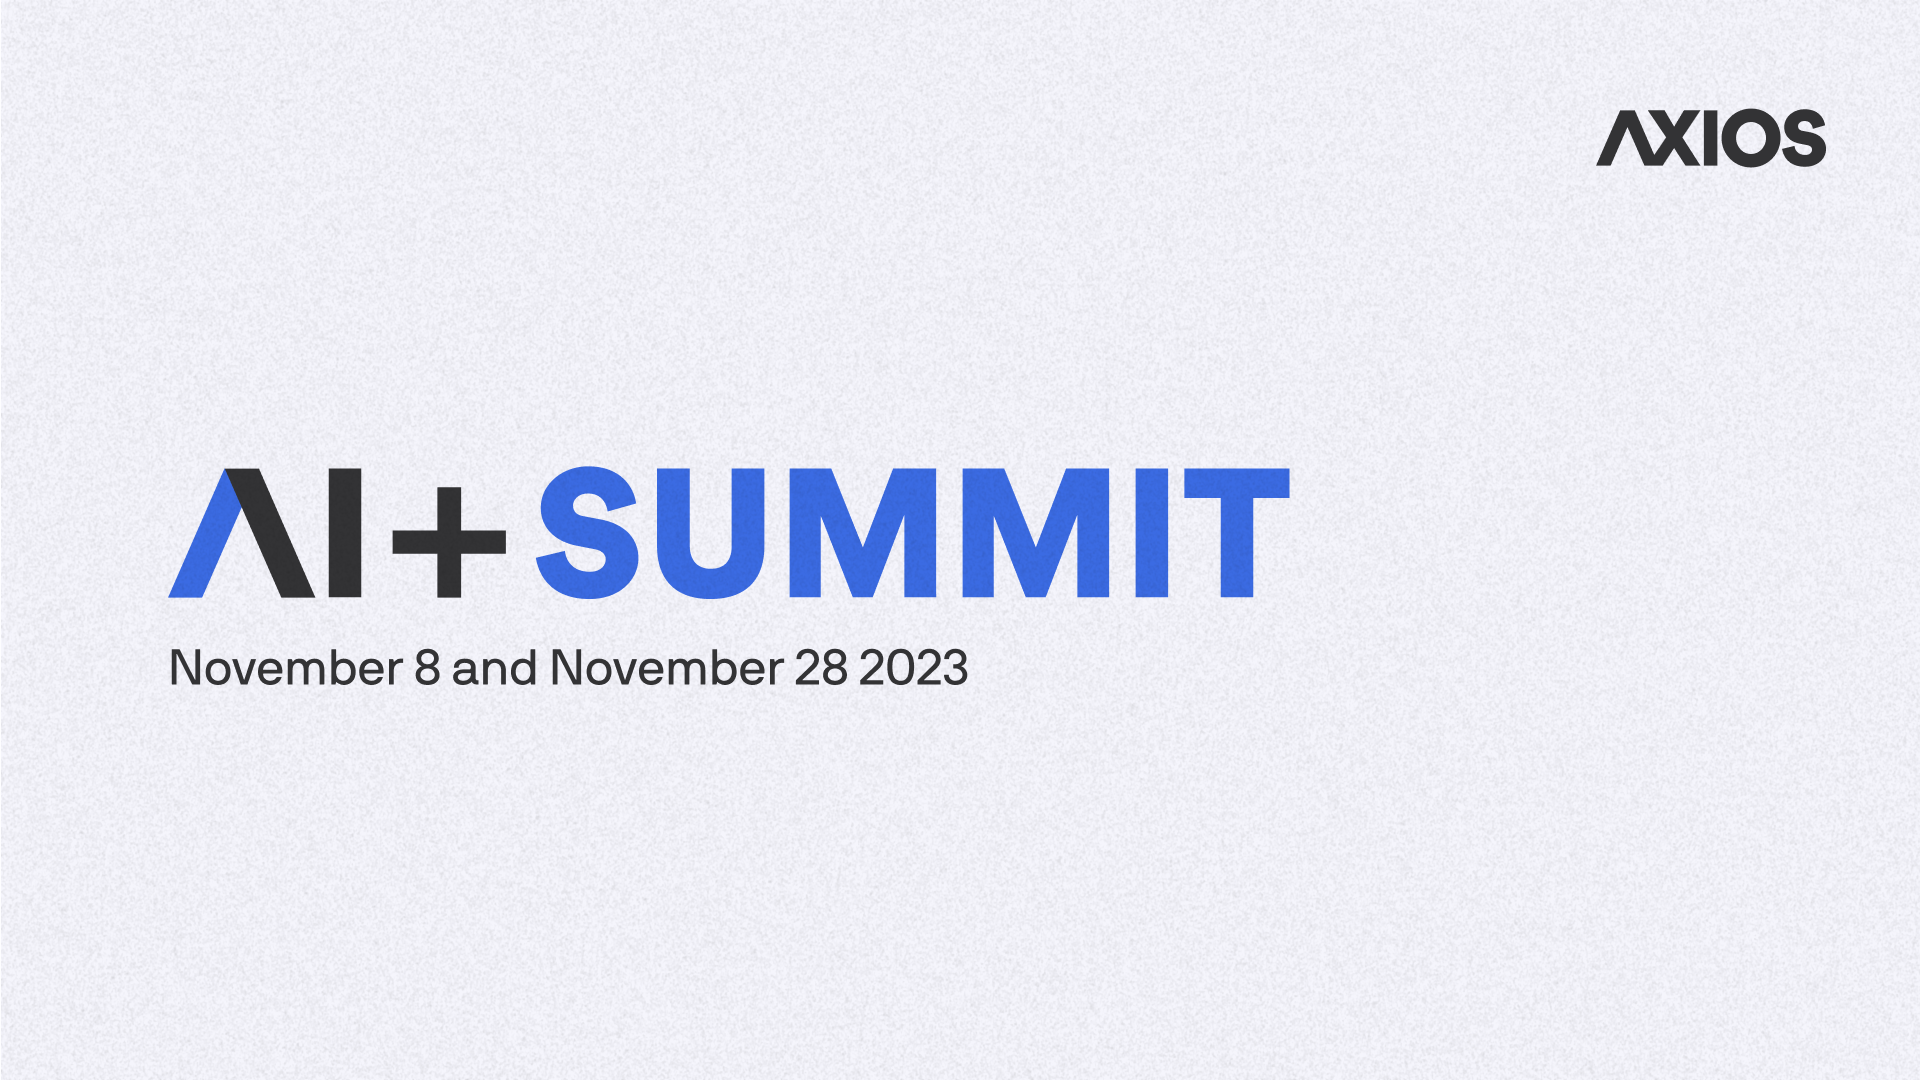 A promo image for two Axios AI+ summits taking place Nov. 8 and Nov. 28, 2023